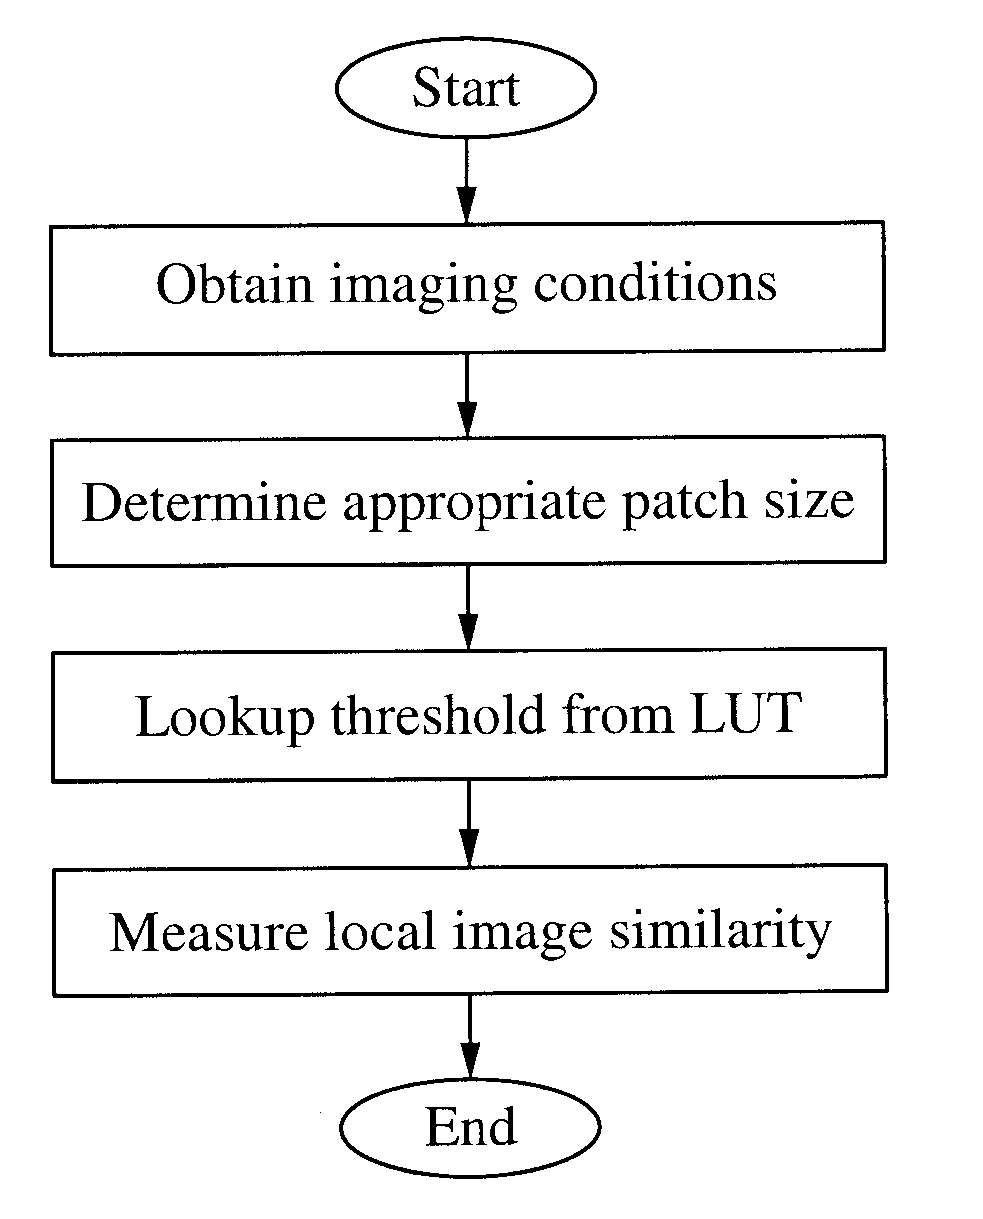 Method to measure local image similarity based on the l1 distance measure